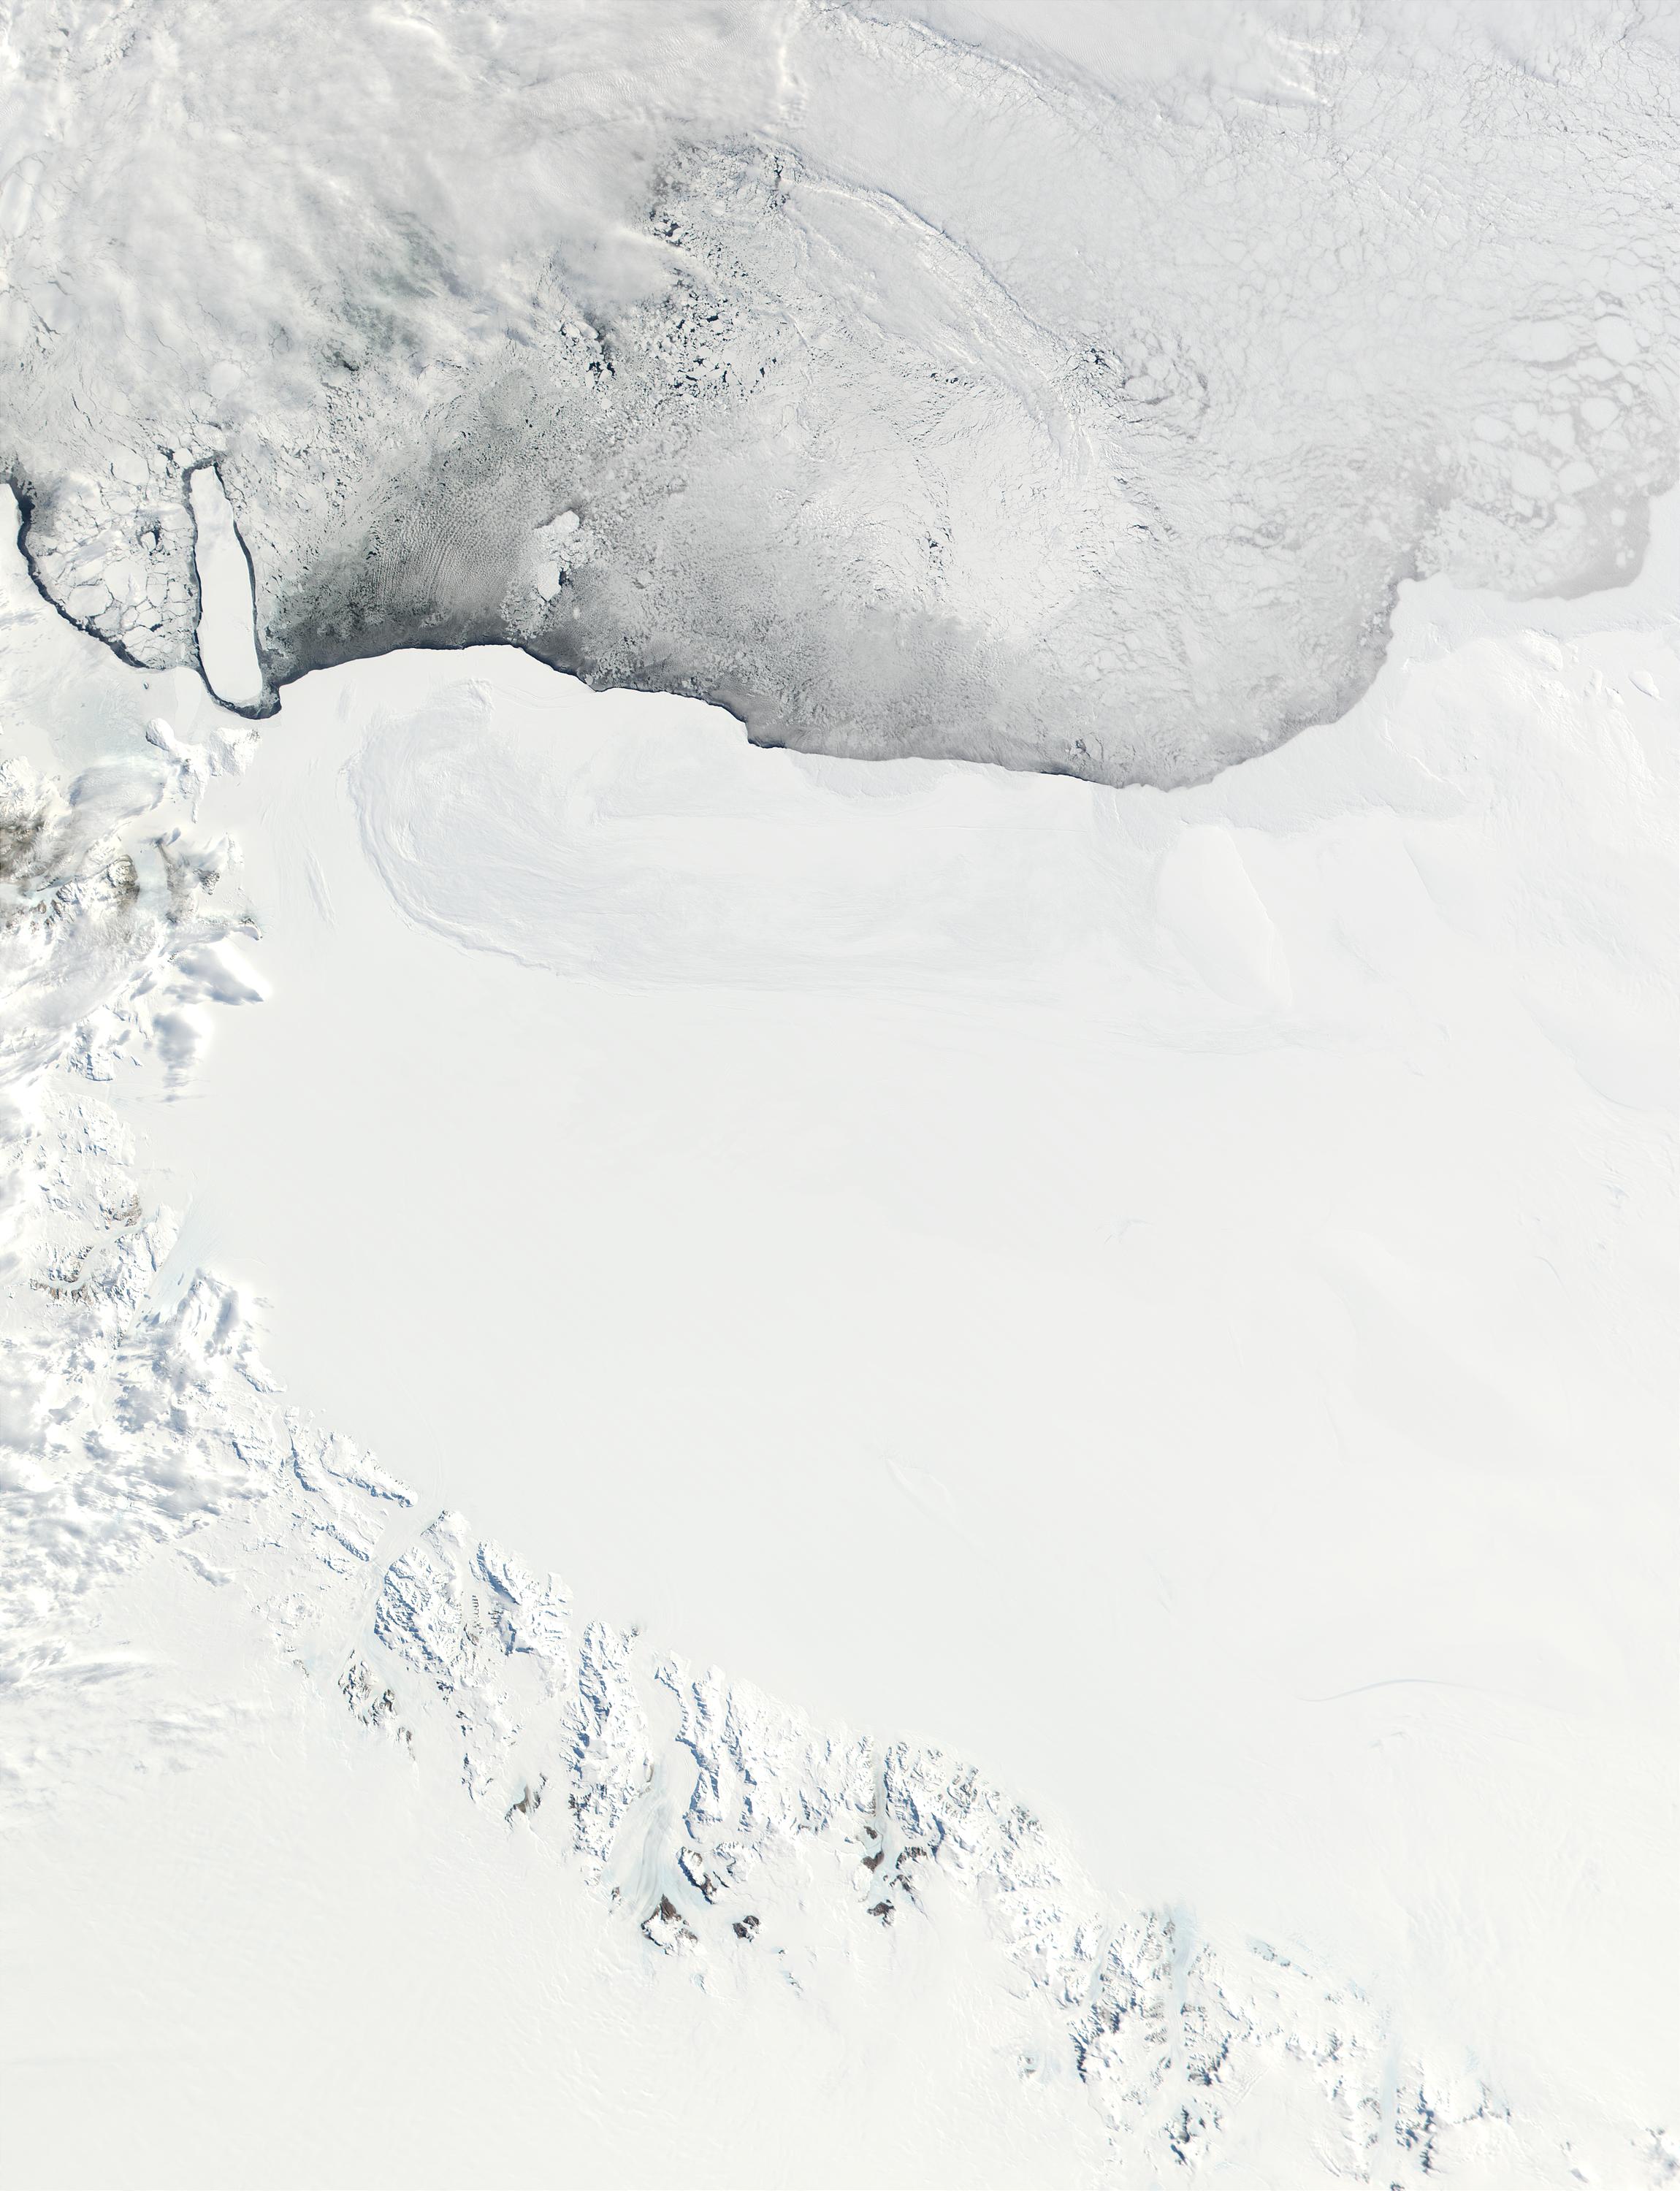 Ross Ice Shelf, Antarctica - related image preview